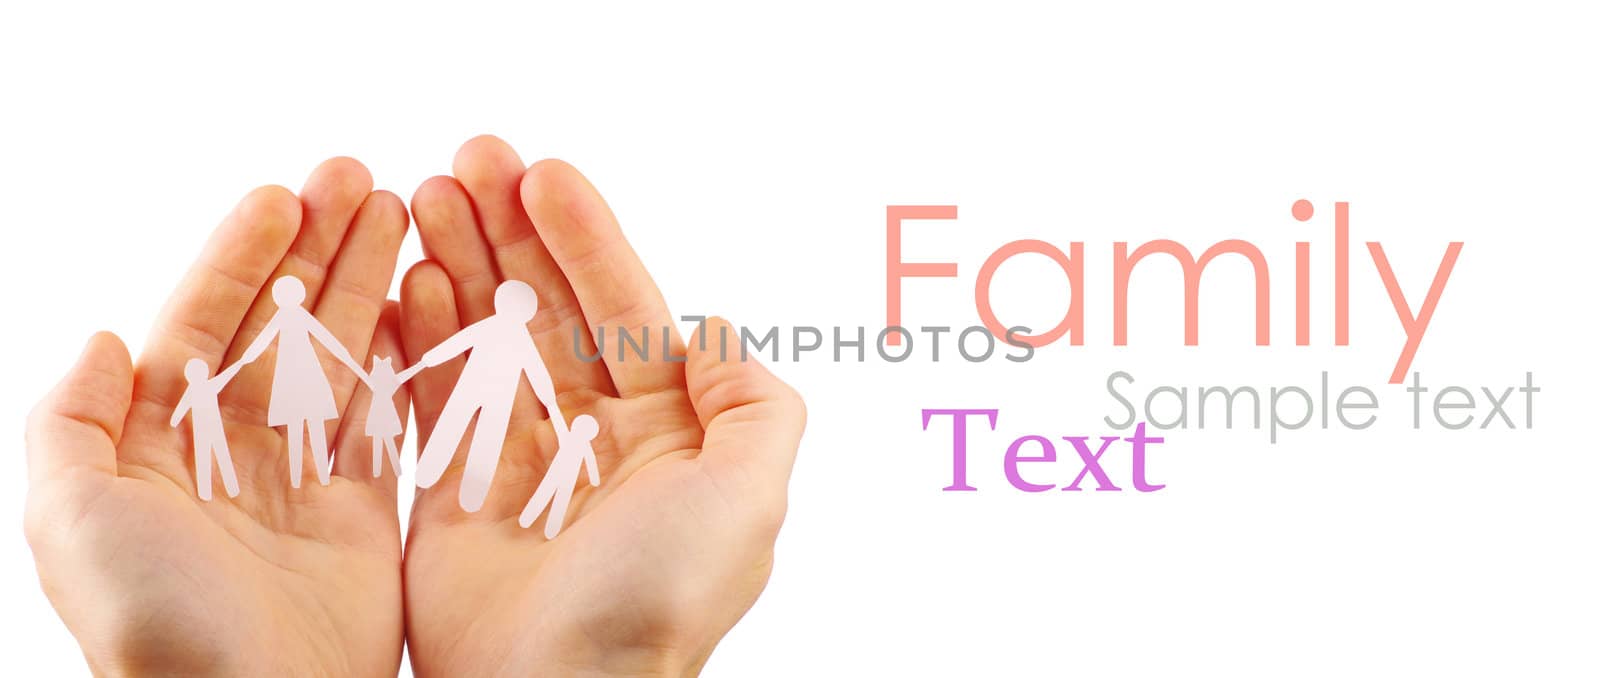 Paper family in hands isolated on white background by oly5